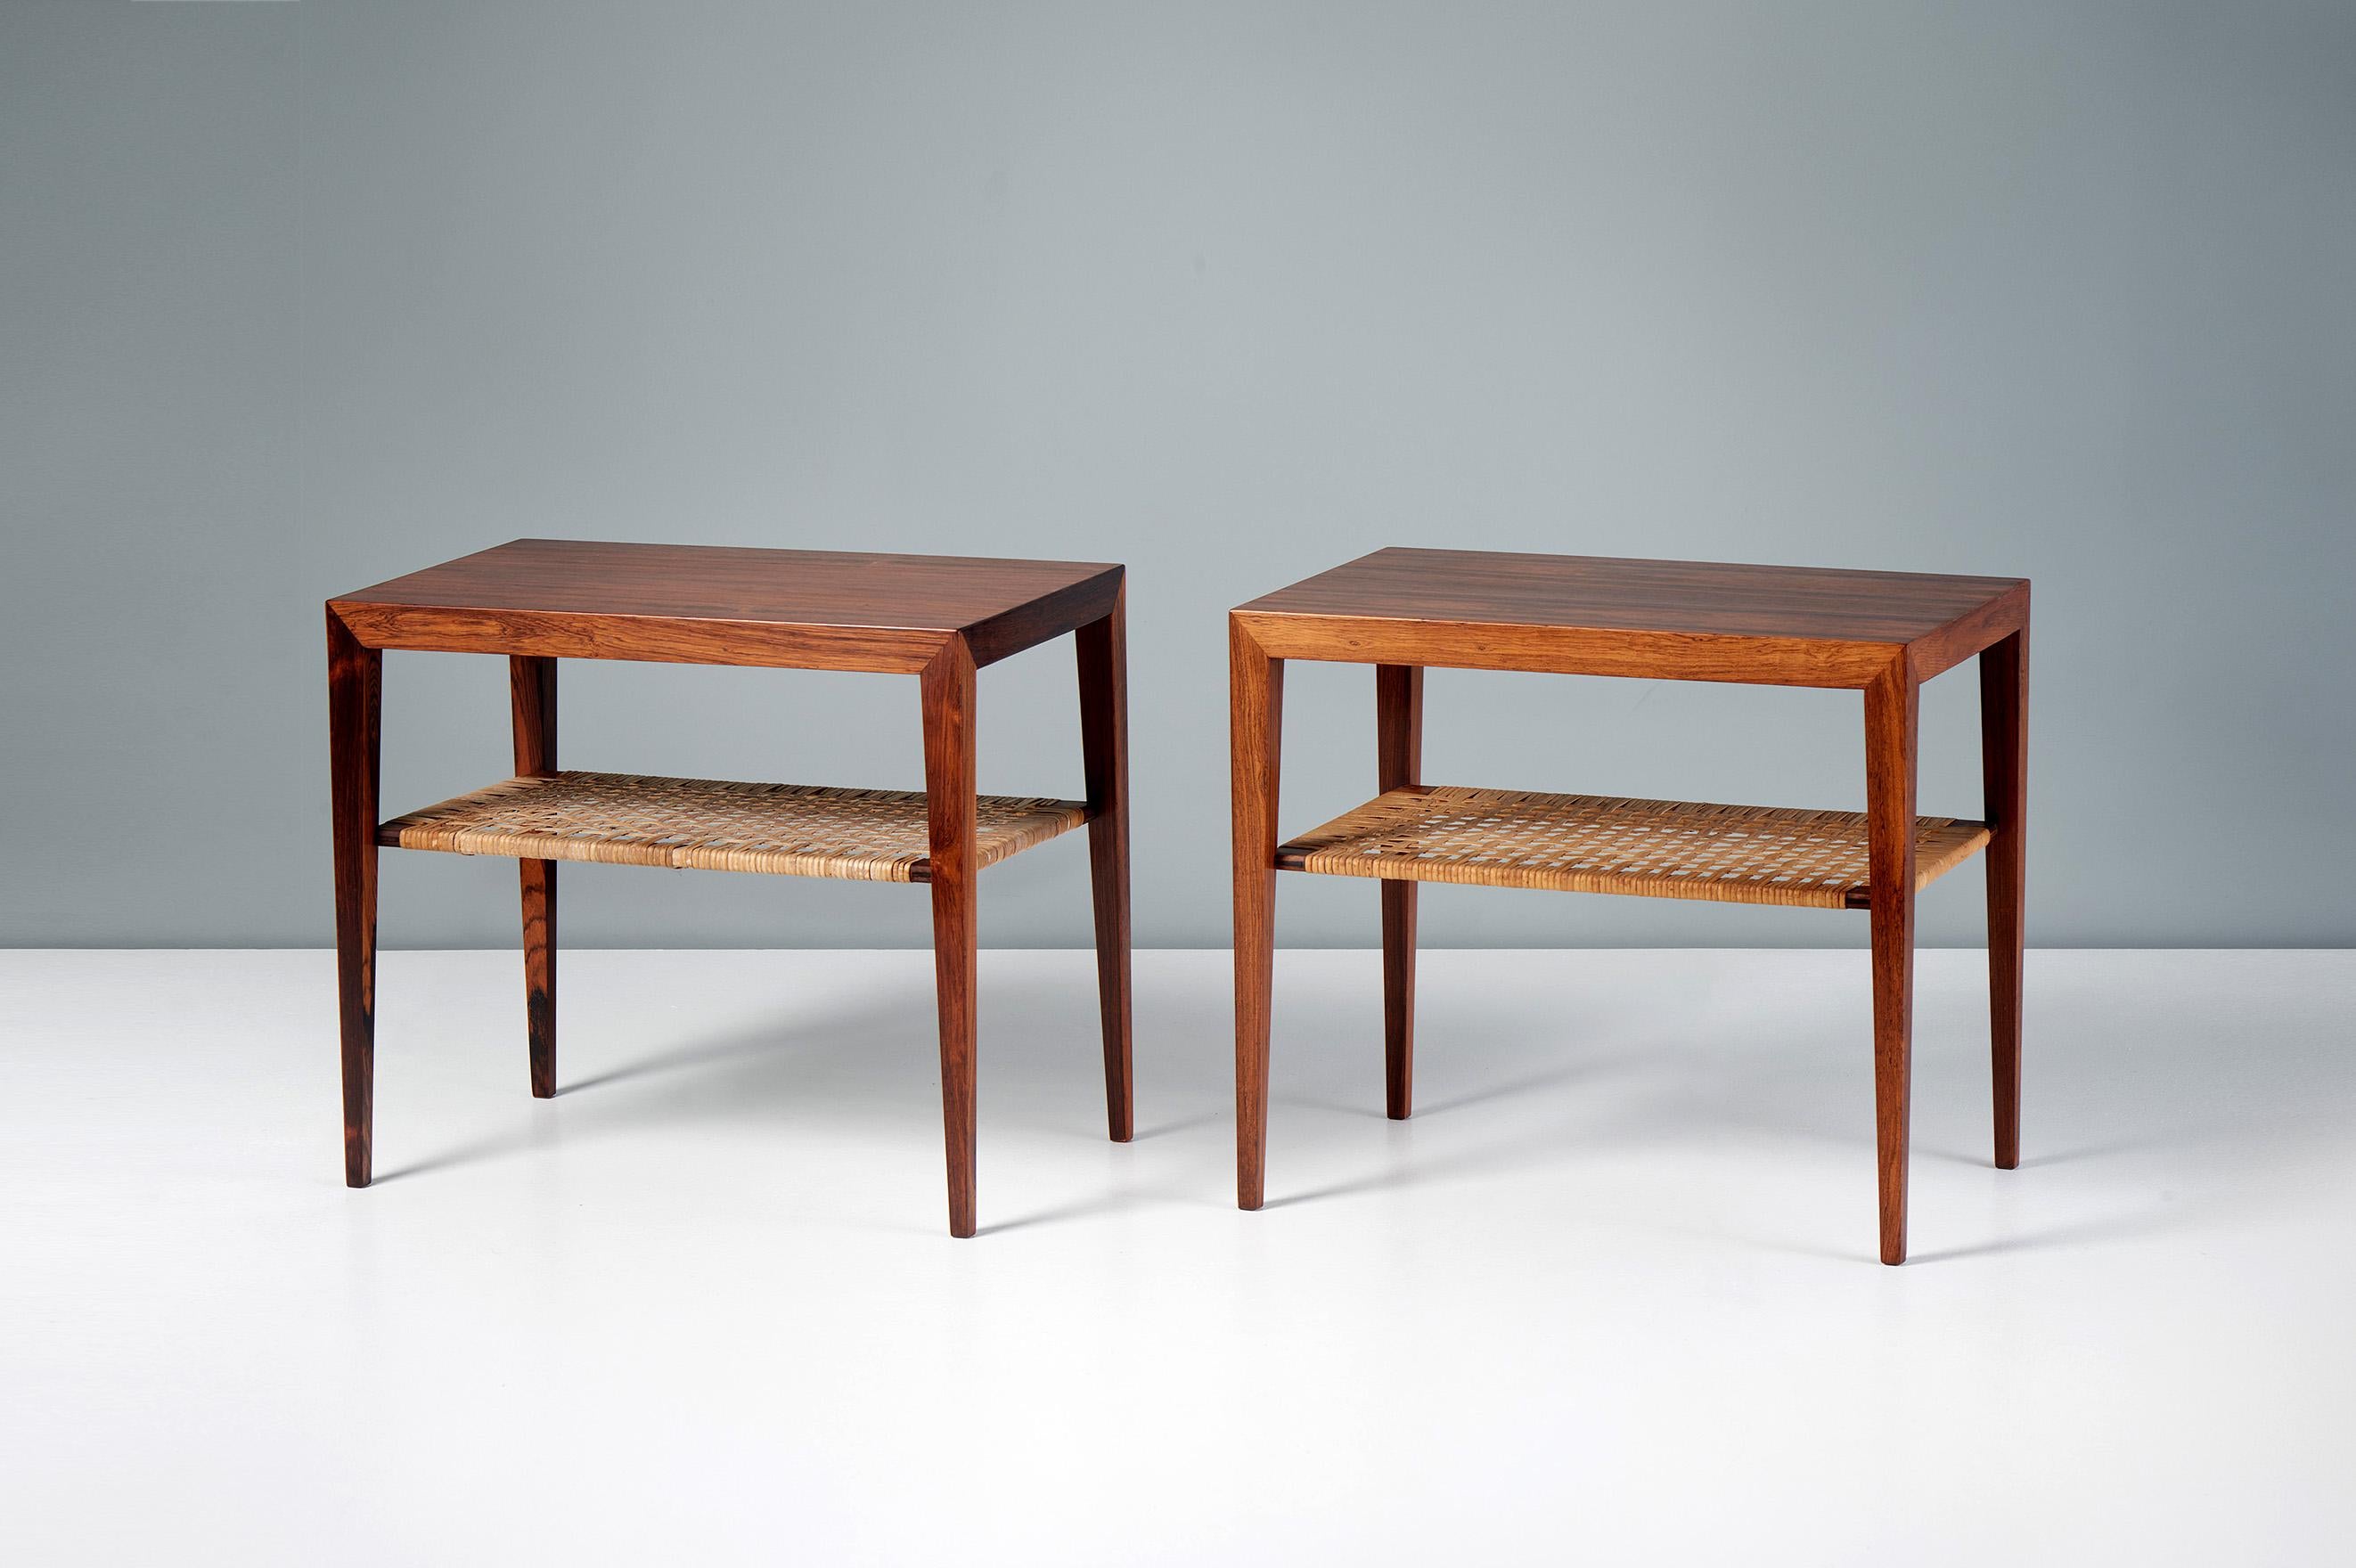 Severin Hansen - Rosewood side Tables, 1950s.

Pair of side tables with original woven rattan cane shelves below. Produced by Haslev Mobelsnedkeri, Denmark in highly figured rosewood veneer with solid legs. Refinished in Danish oil at our workshops